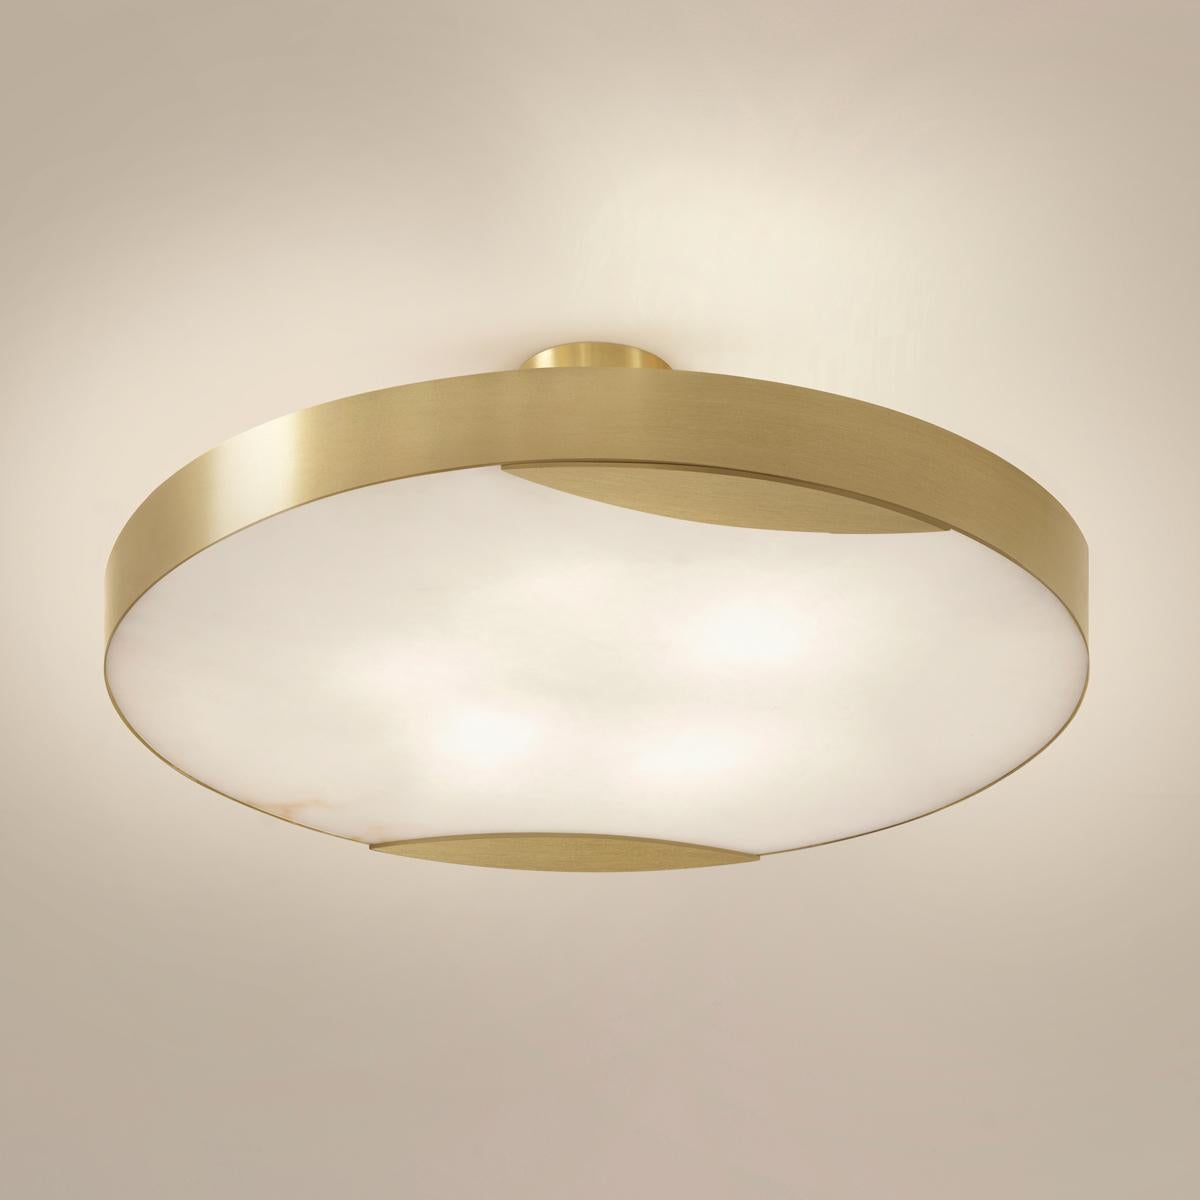 Cloud N.1 Ceiling Light by Gaspare Asaro-Bronze Finish In New Condition For Sale In New York, NY